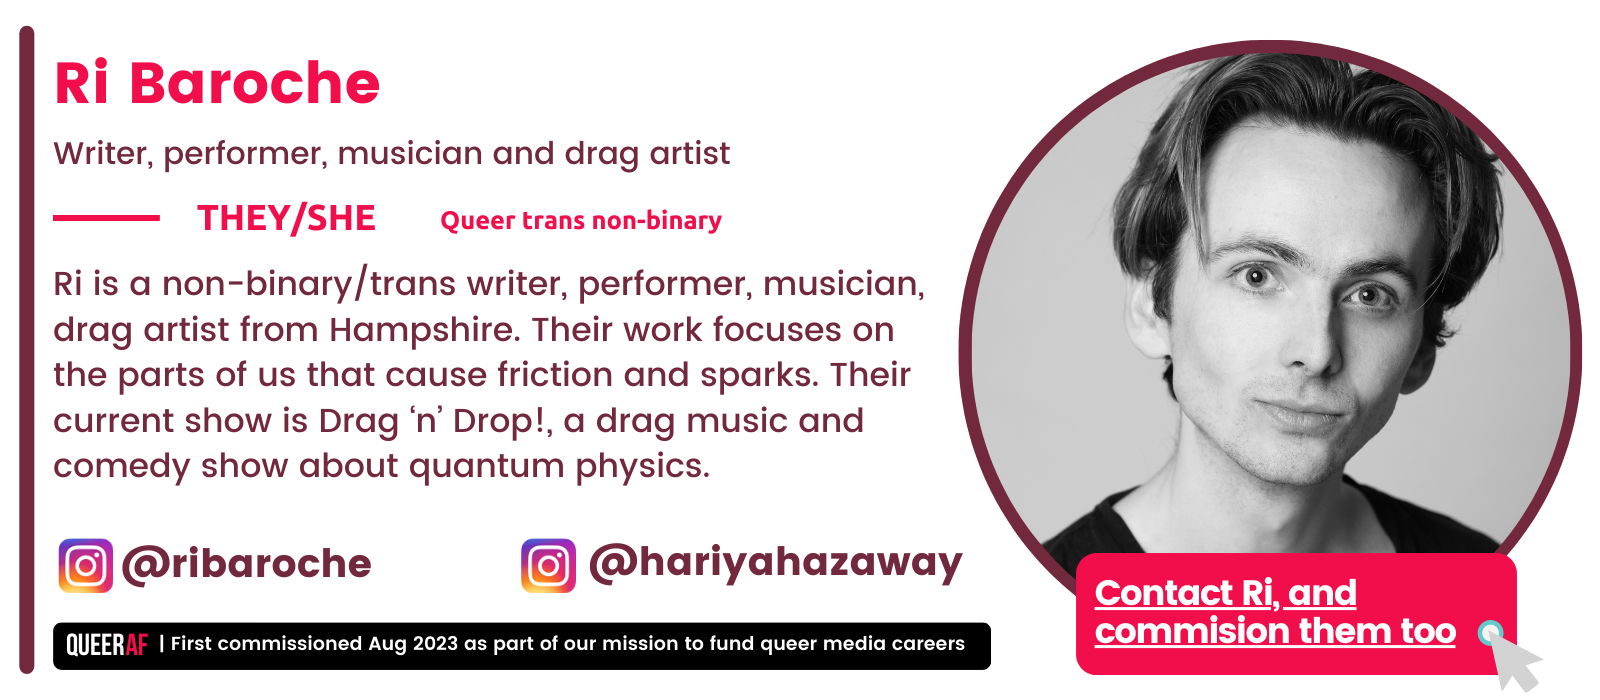  | First commissioned Aug 2023 as part of our mission to fund queer media careers Queer AF @ribaroche Contact Ri, and commision them too  Ri is a non-binary/trans writer, performer, musician, drag artist from Hampshire. Their work focuses on the parts of us that cause friction and sparks. Their current show is Drag ‘n’ Drop!, a drag music and comedy show about quantum physics.  @hariyahazaway       Queer trans non-binary  They/she Ri Baroche Writer, performer, musician and drag artist